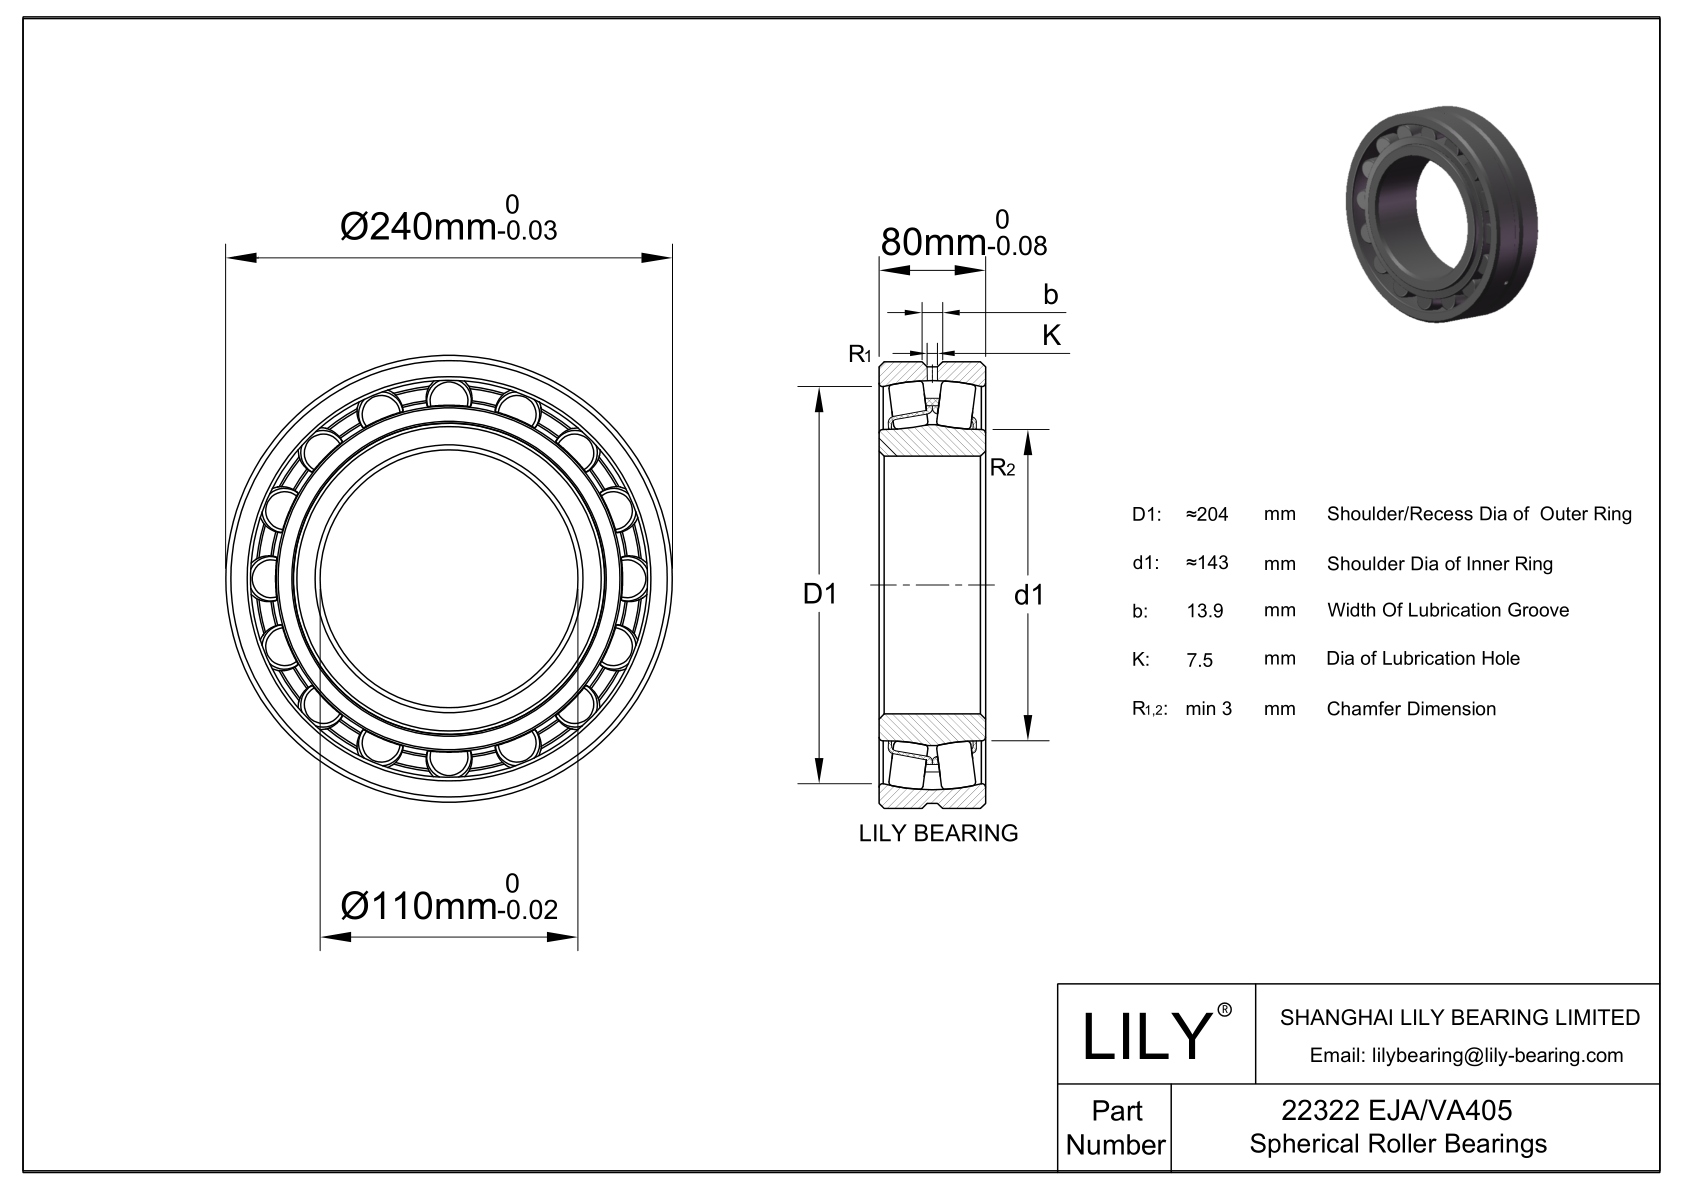 22322 EJA/VA405 Double Row Spherical Roller Bearing cad drawing